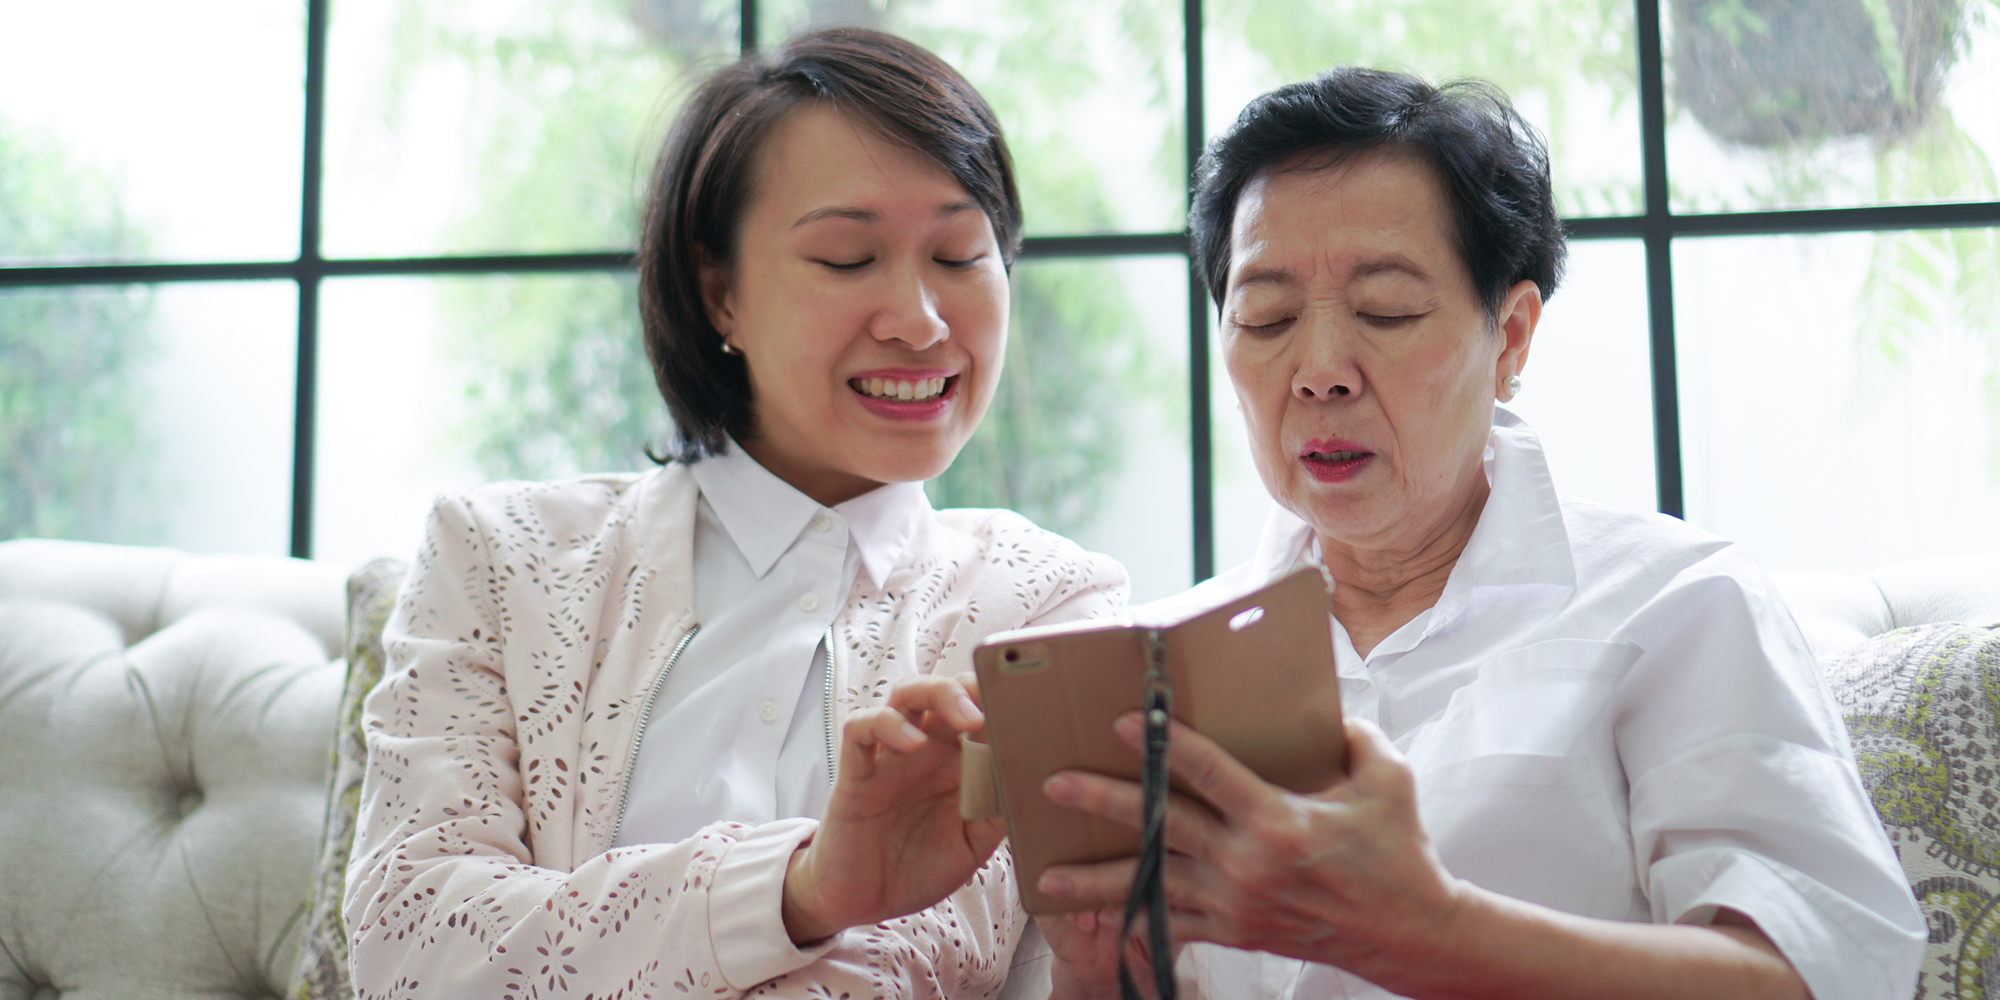 older lady and a young lady looking at a smartphone together  | smartphone for a grandparent